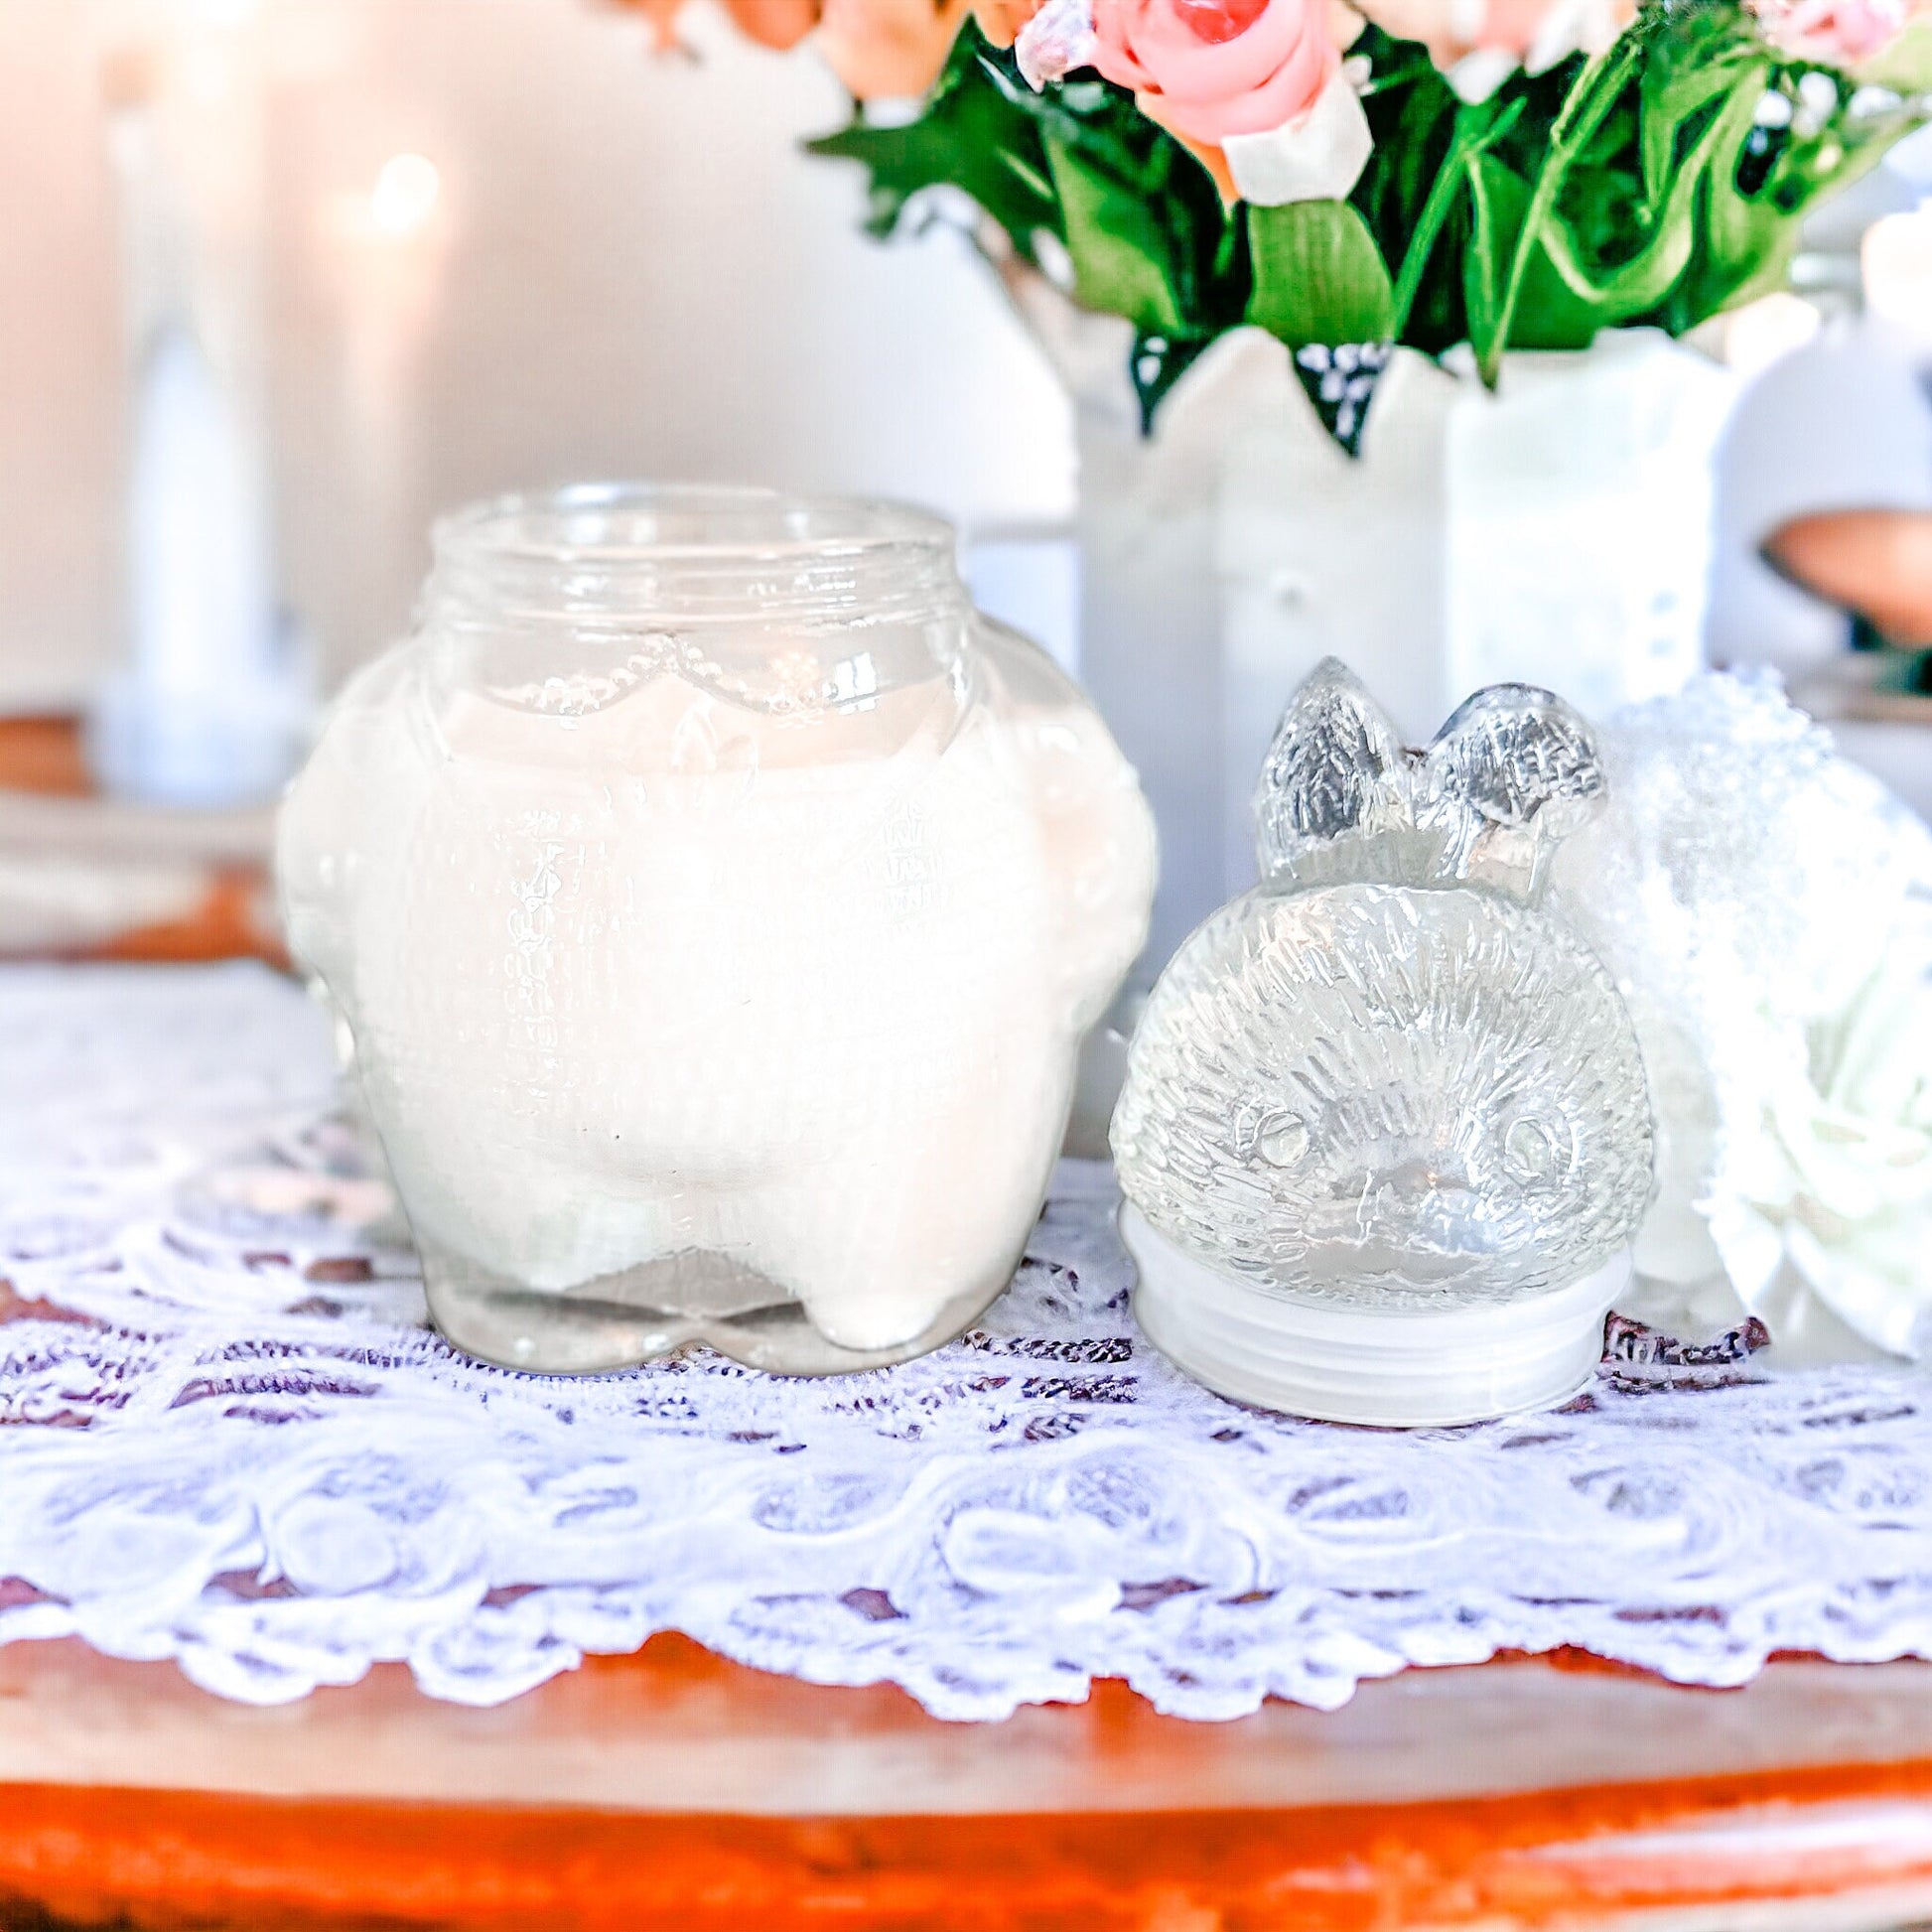 Soy Candle, Vintage Glass, Best Friend Gifts, Farmhouse Decor